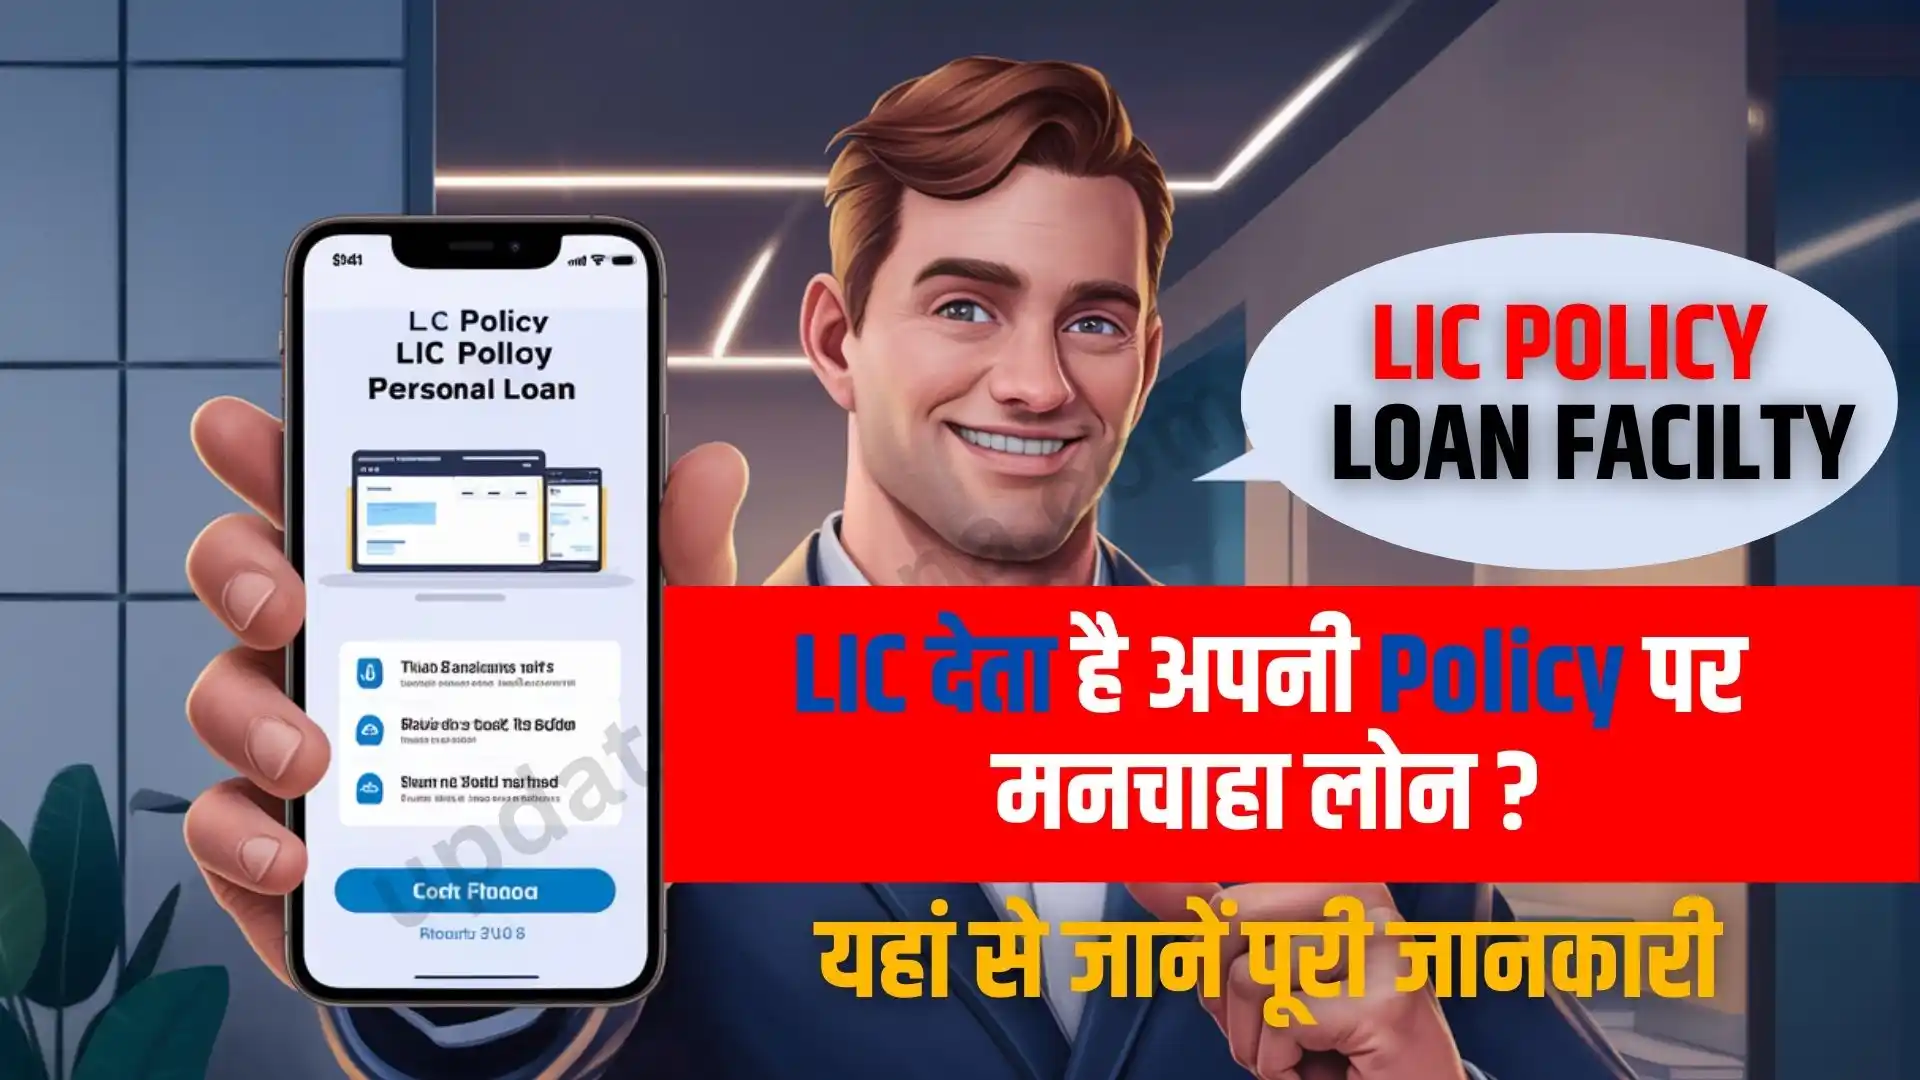 LIC Policy Personal Loan